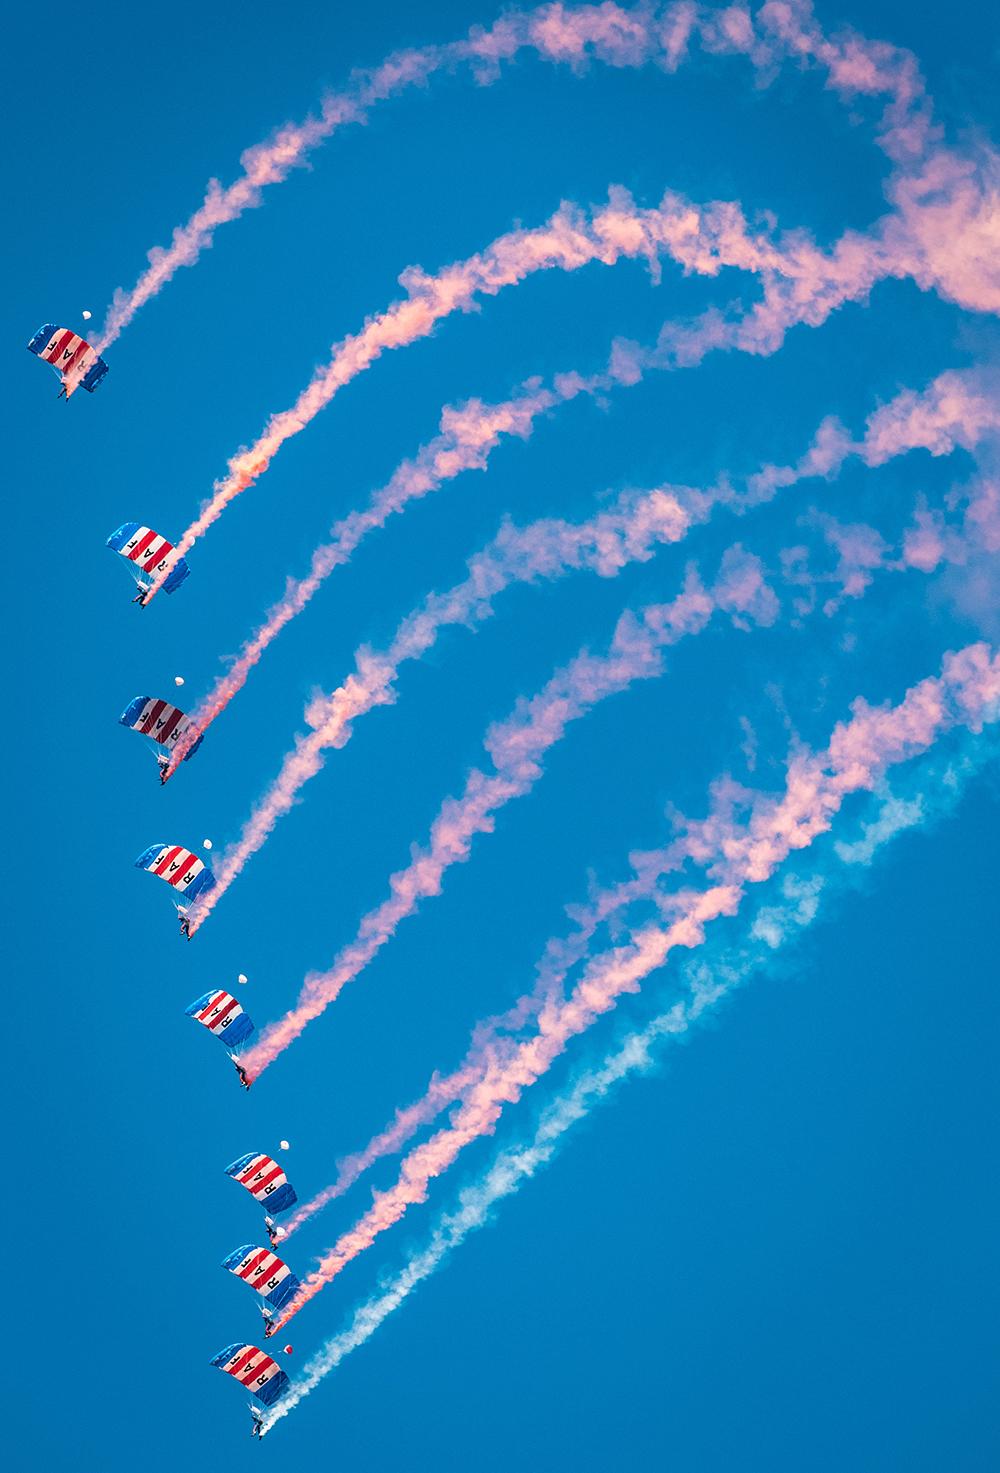 The RAF Falcons displaying at the Tenth Annual Armed Forces Day in Llandudno